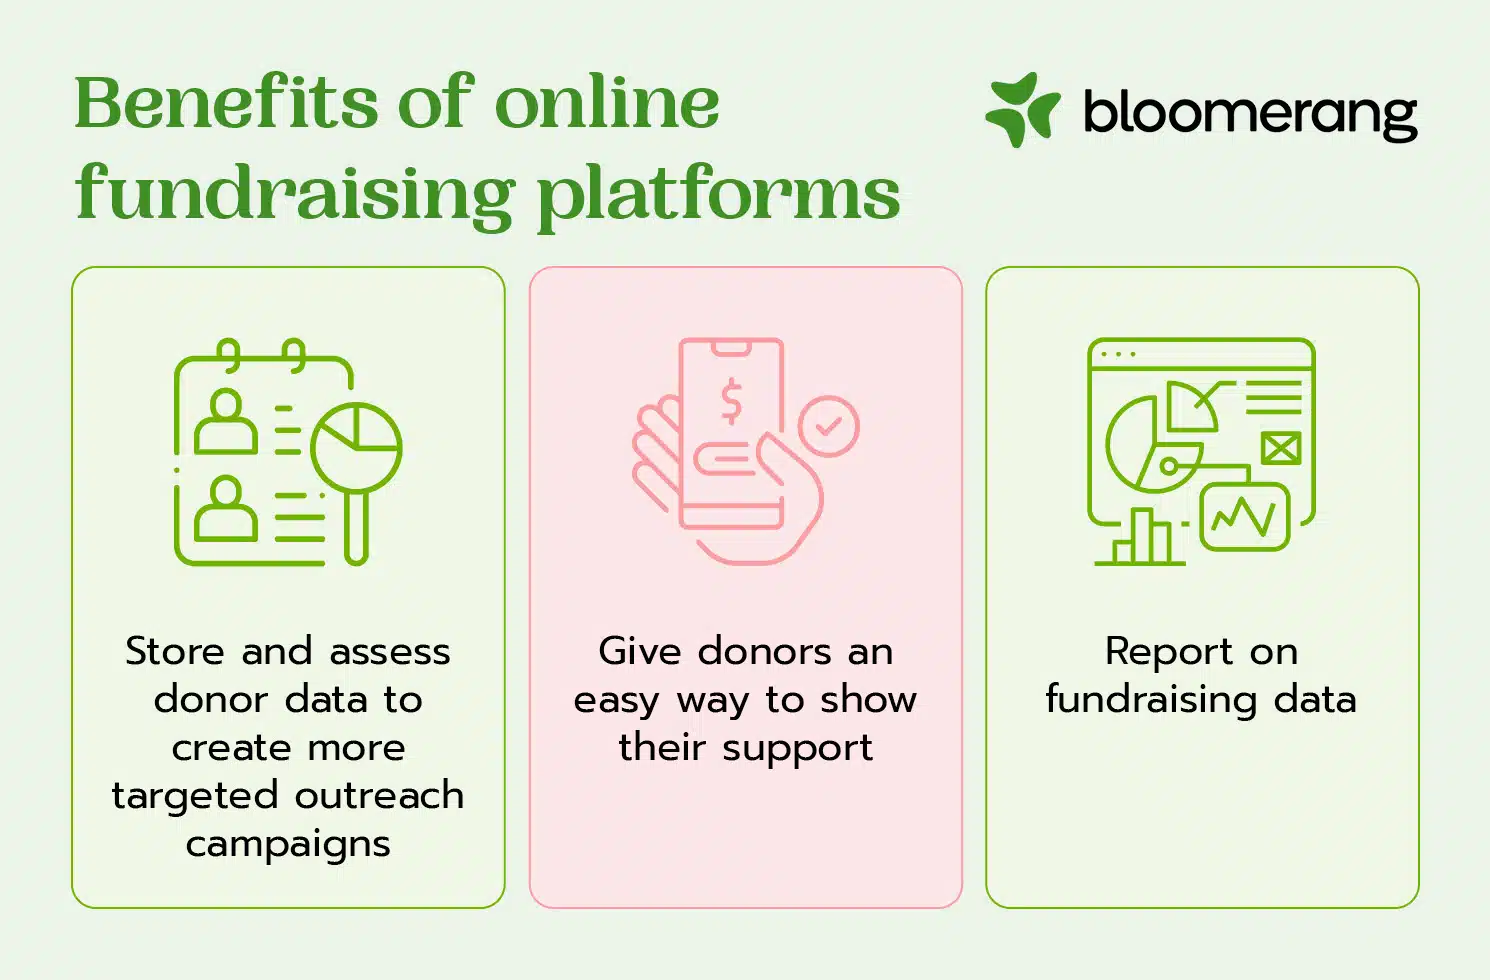 These are the benefits of online fundraising platforms (outlined in the text below). 